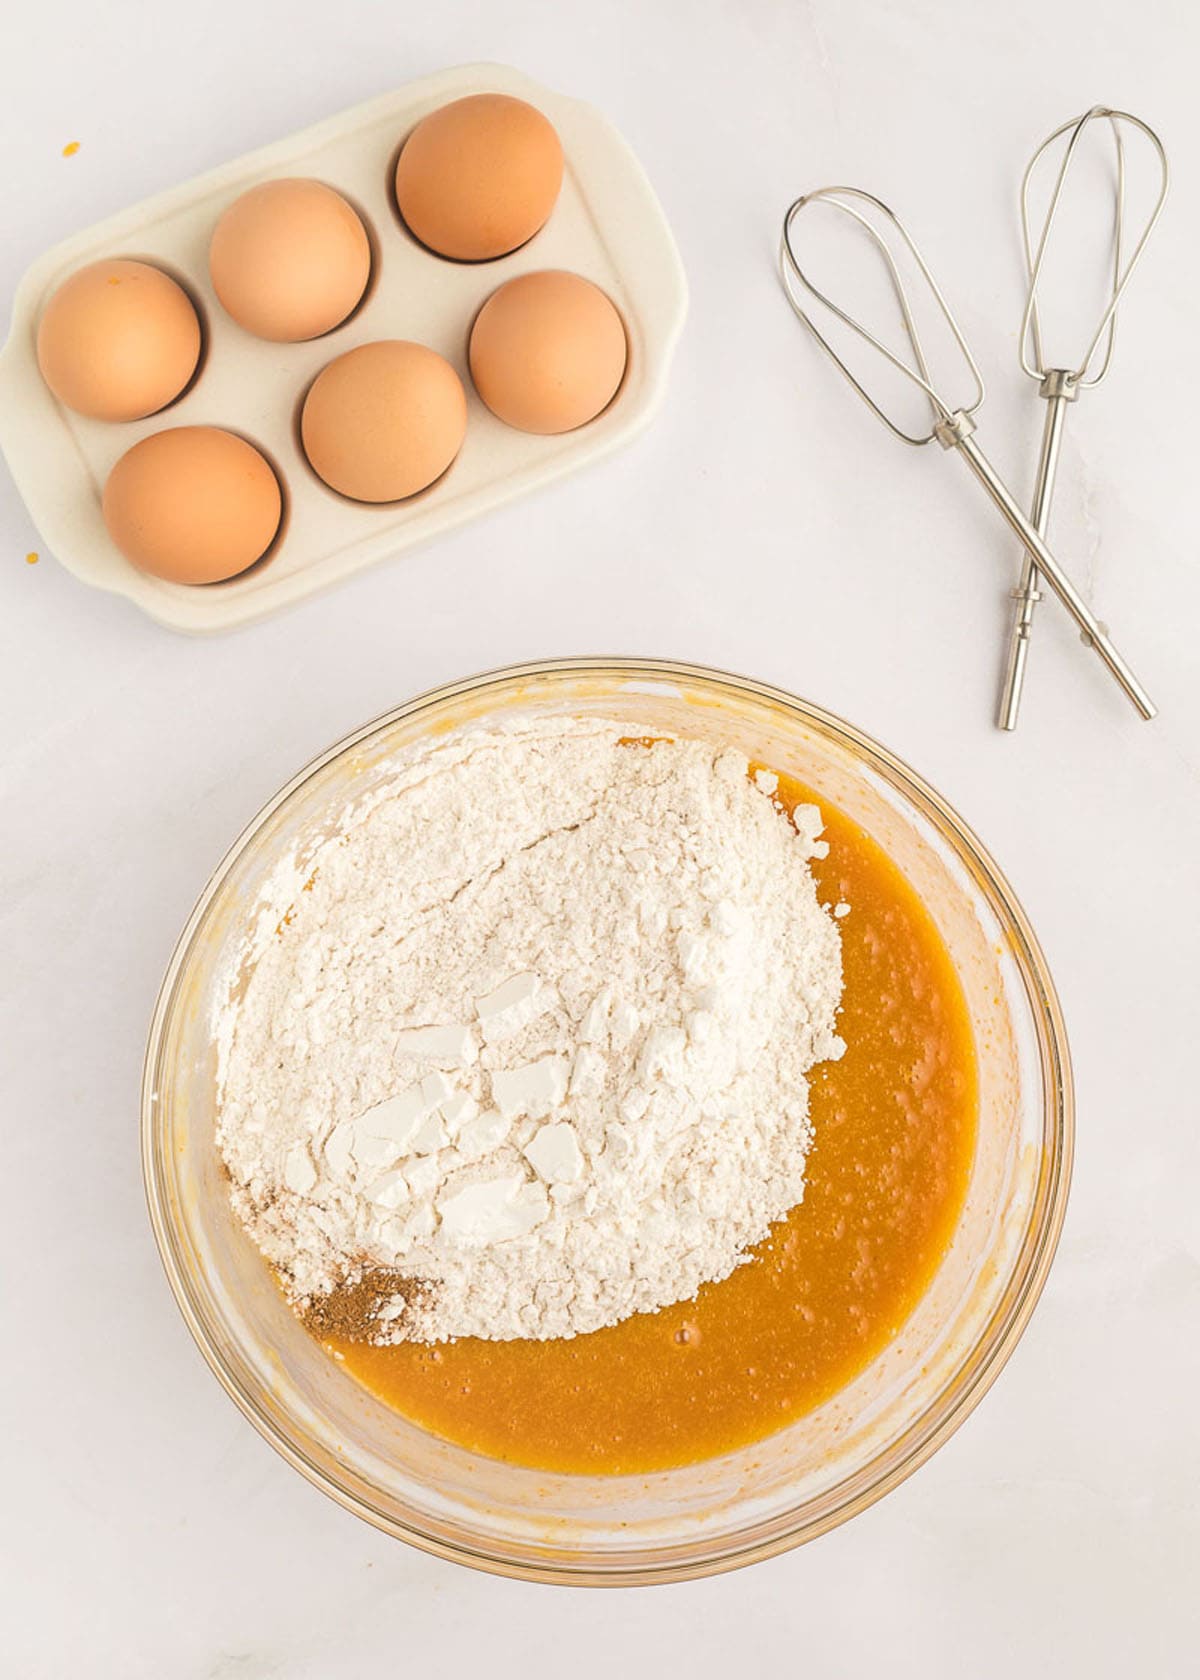 The flour, egg, and pumpkin cake spice mixture added to the eggs and canned pumpkin.